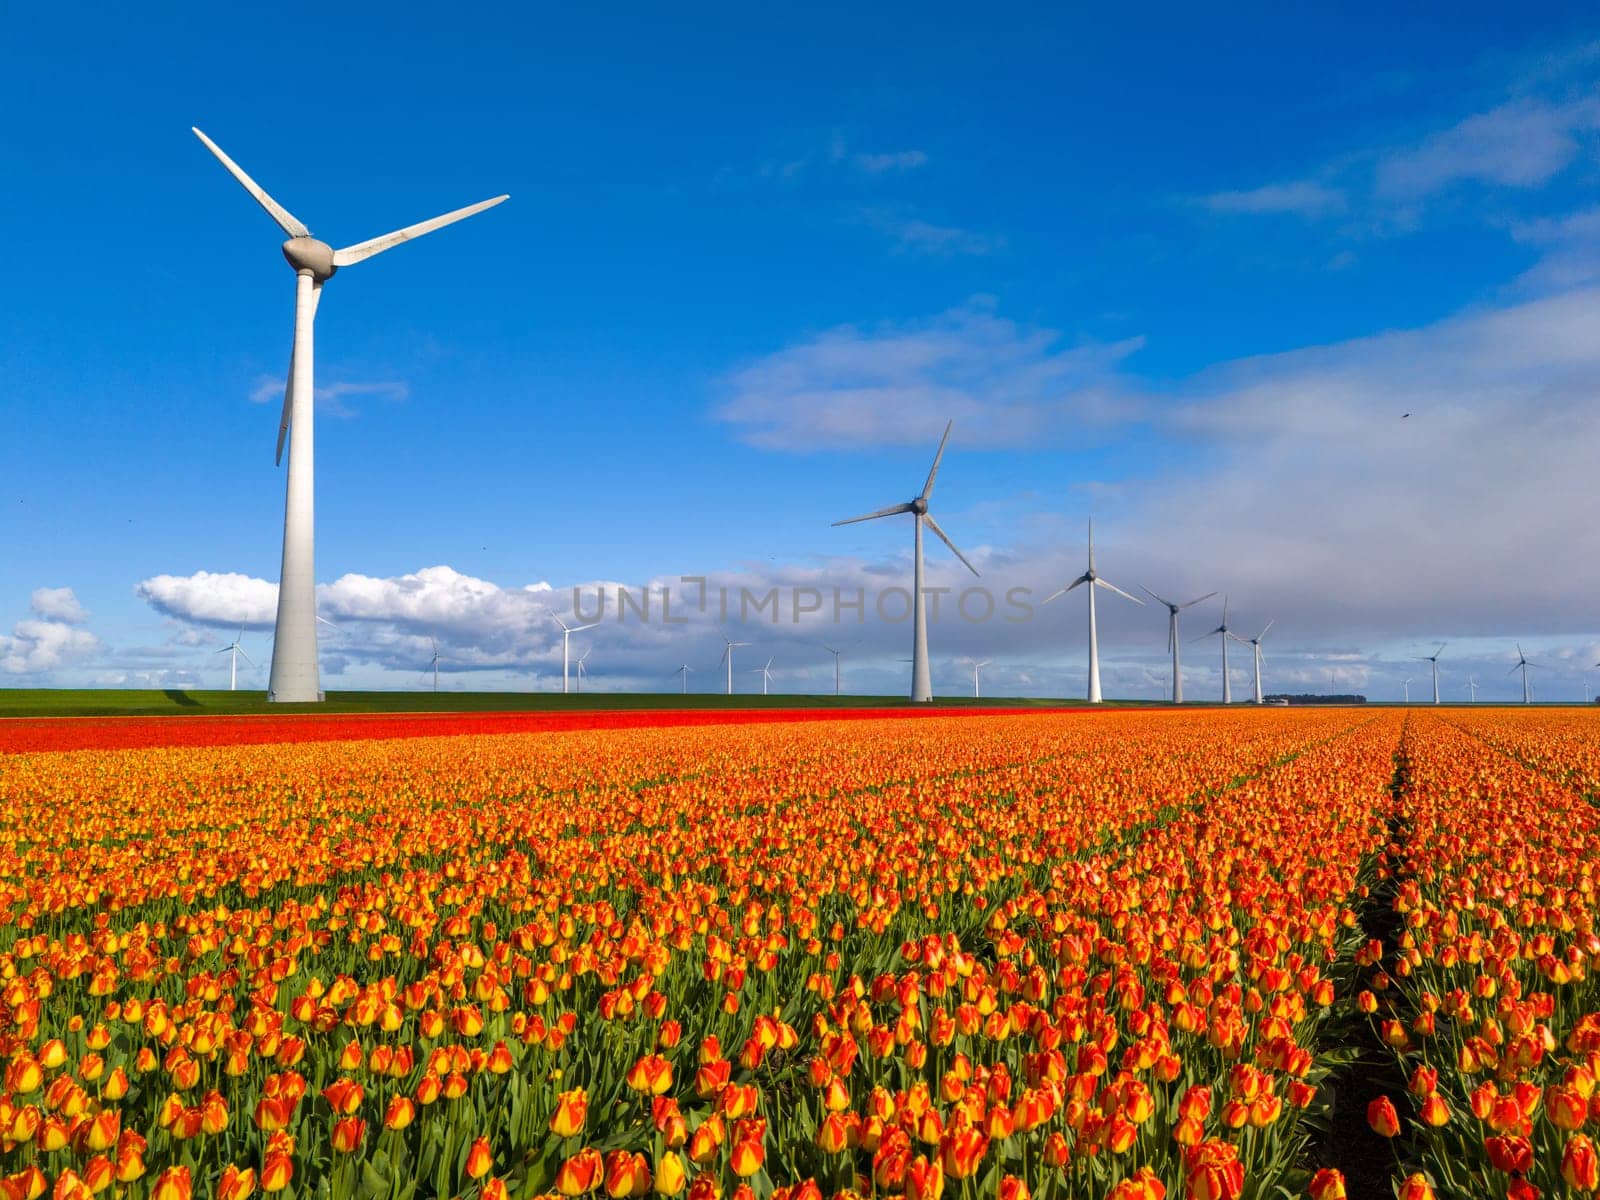 windmill park with spring flowers and a blue sky, windmill park in the Netherlands aerial view with wind turbine and tulip flower field Flevoland Netherlands, Green energy, energy transition